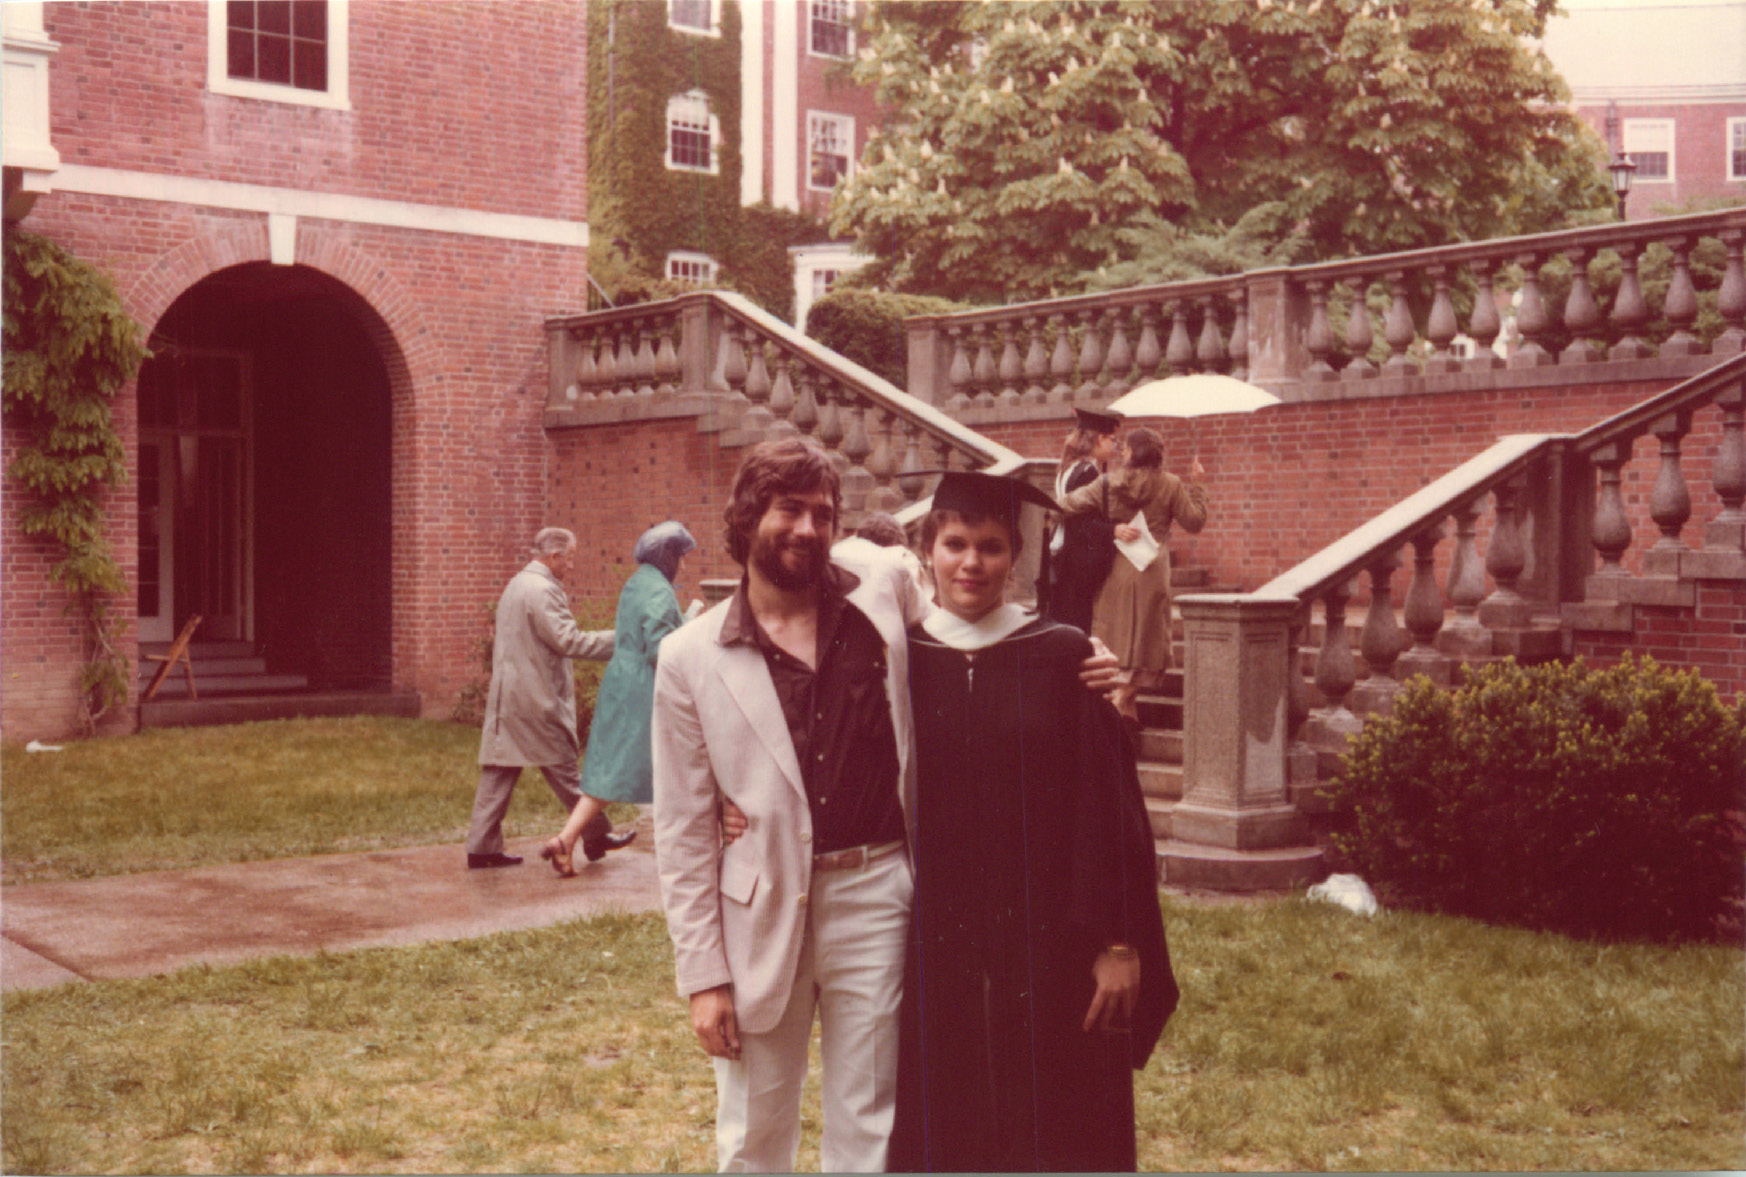 John Wagner & Celeste at her graduation, Smith College, May 17, 1980